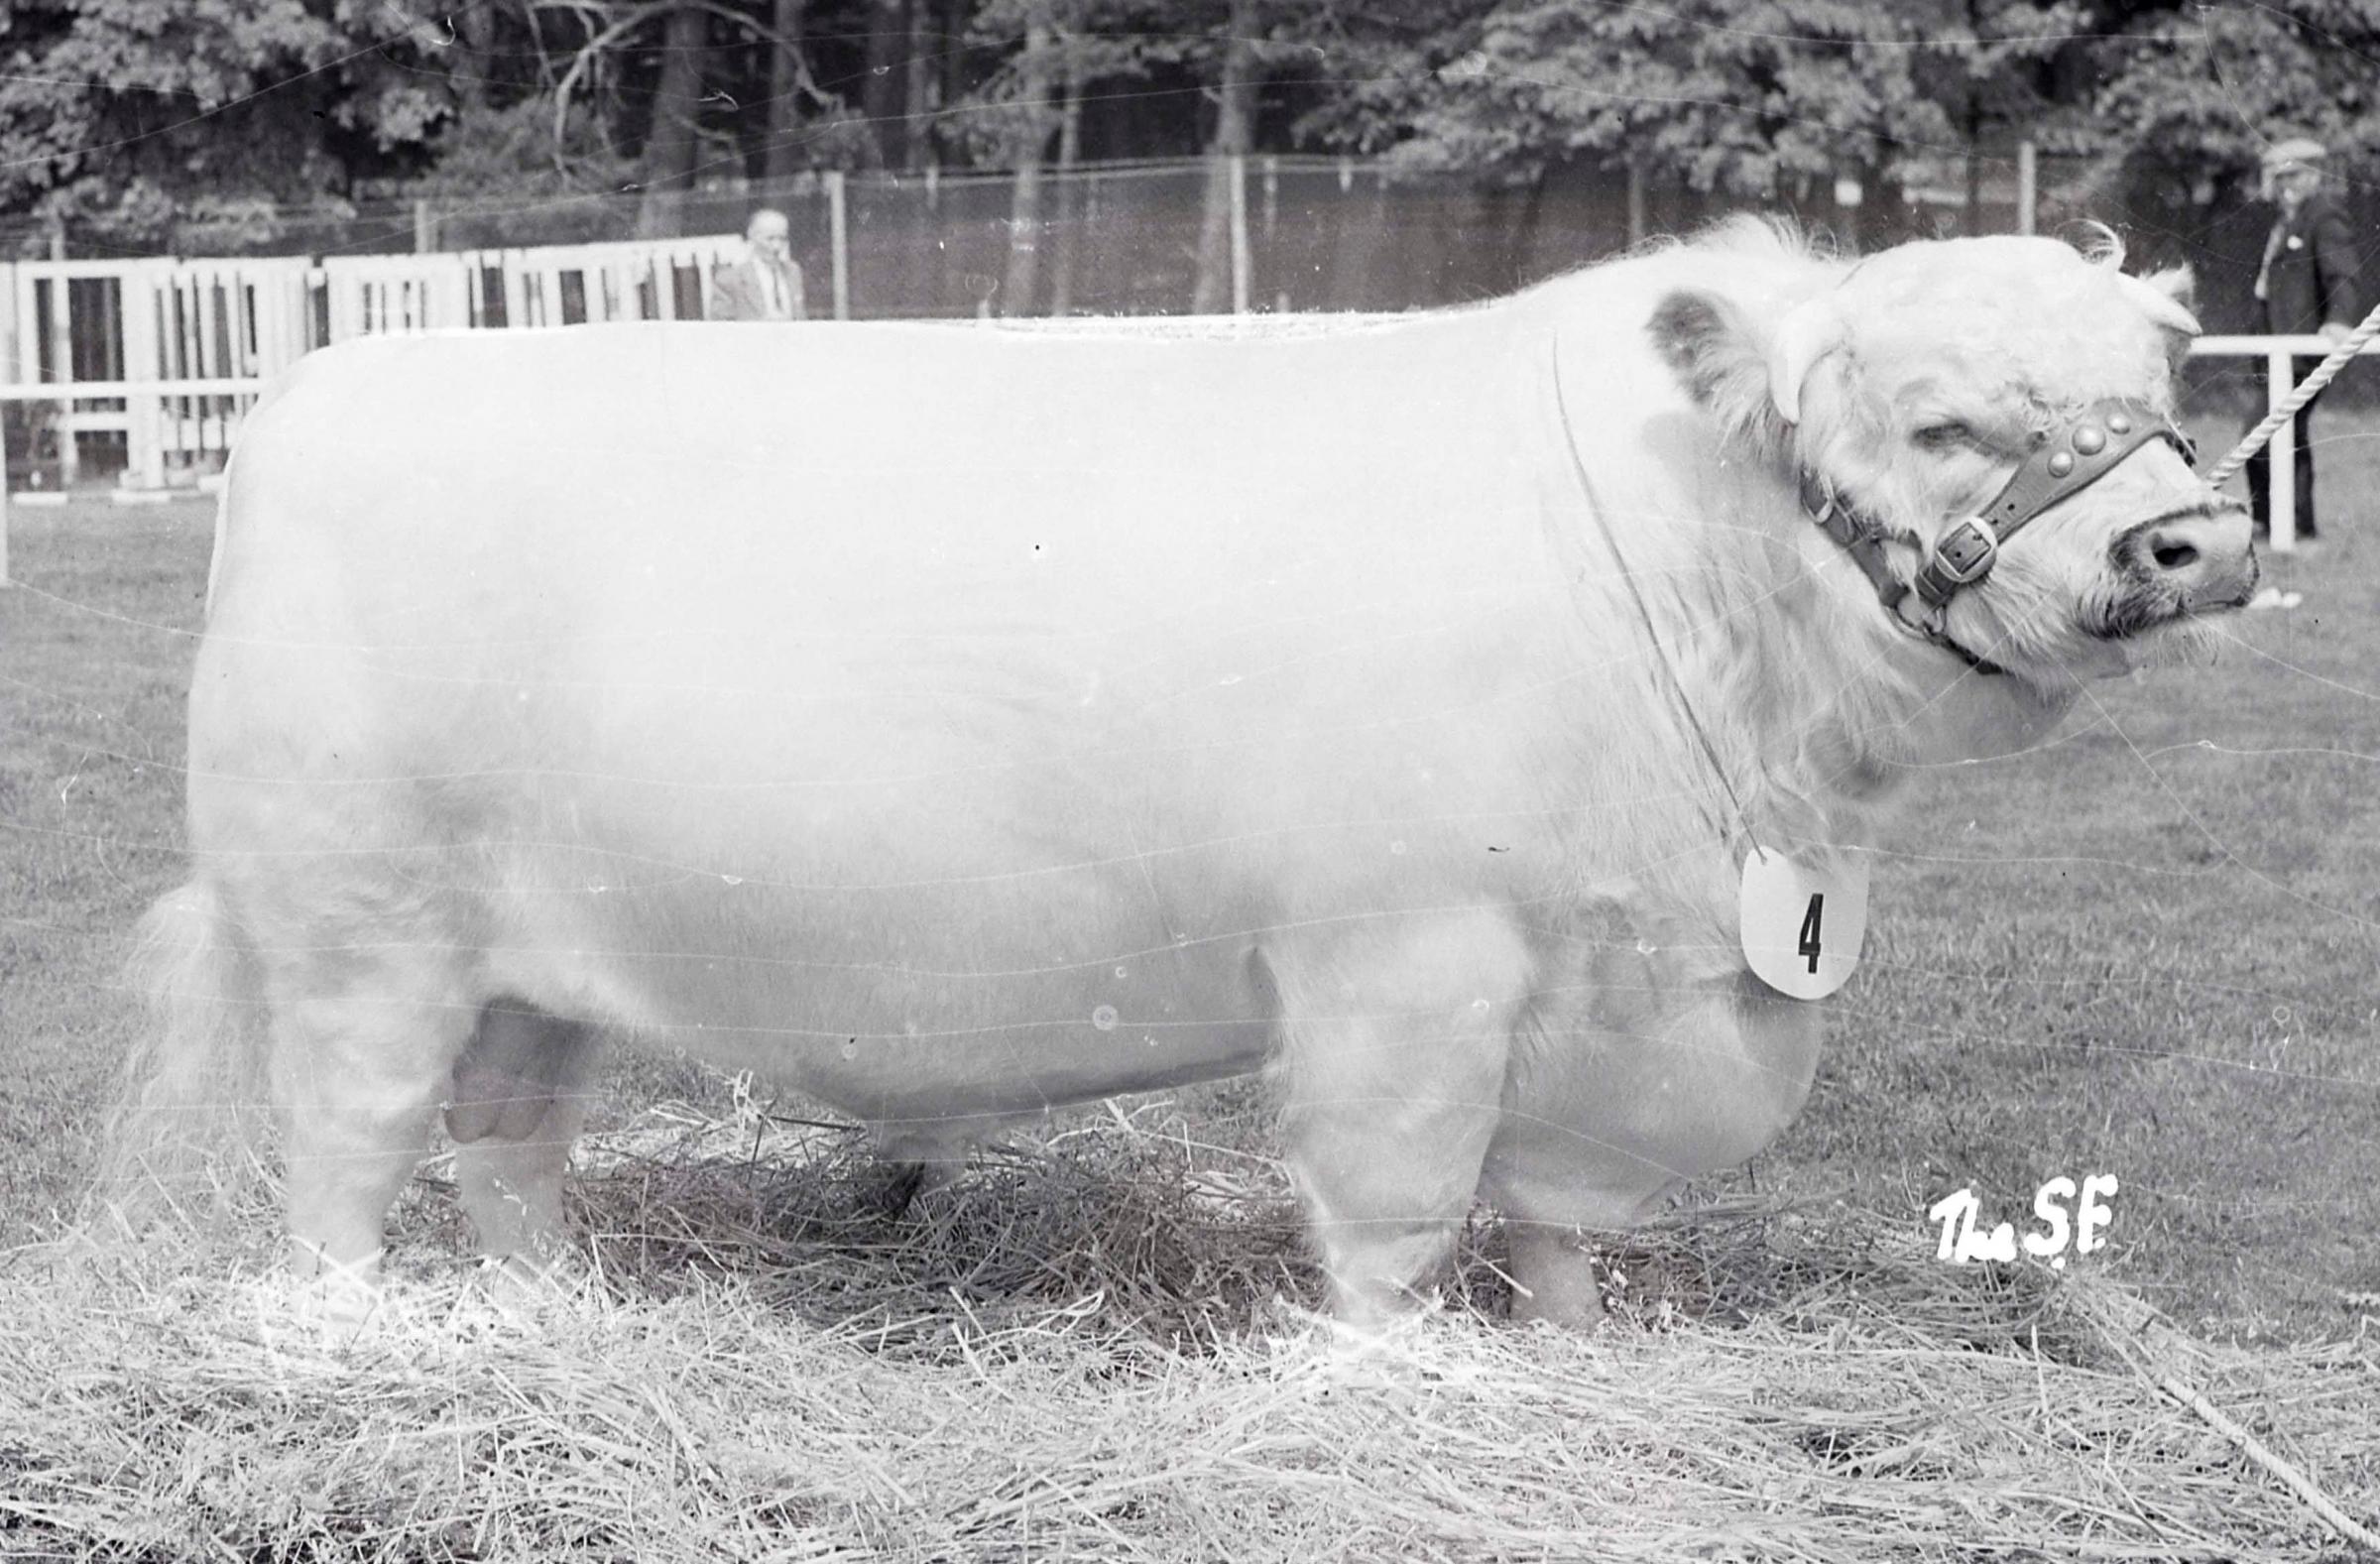 There was a rarity at the 1953 show in Alloa, when the white Shorthorn, Erimus Ghost, won the breed championship Picture ref: 1395